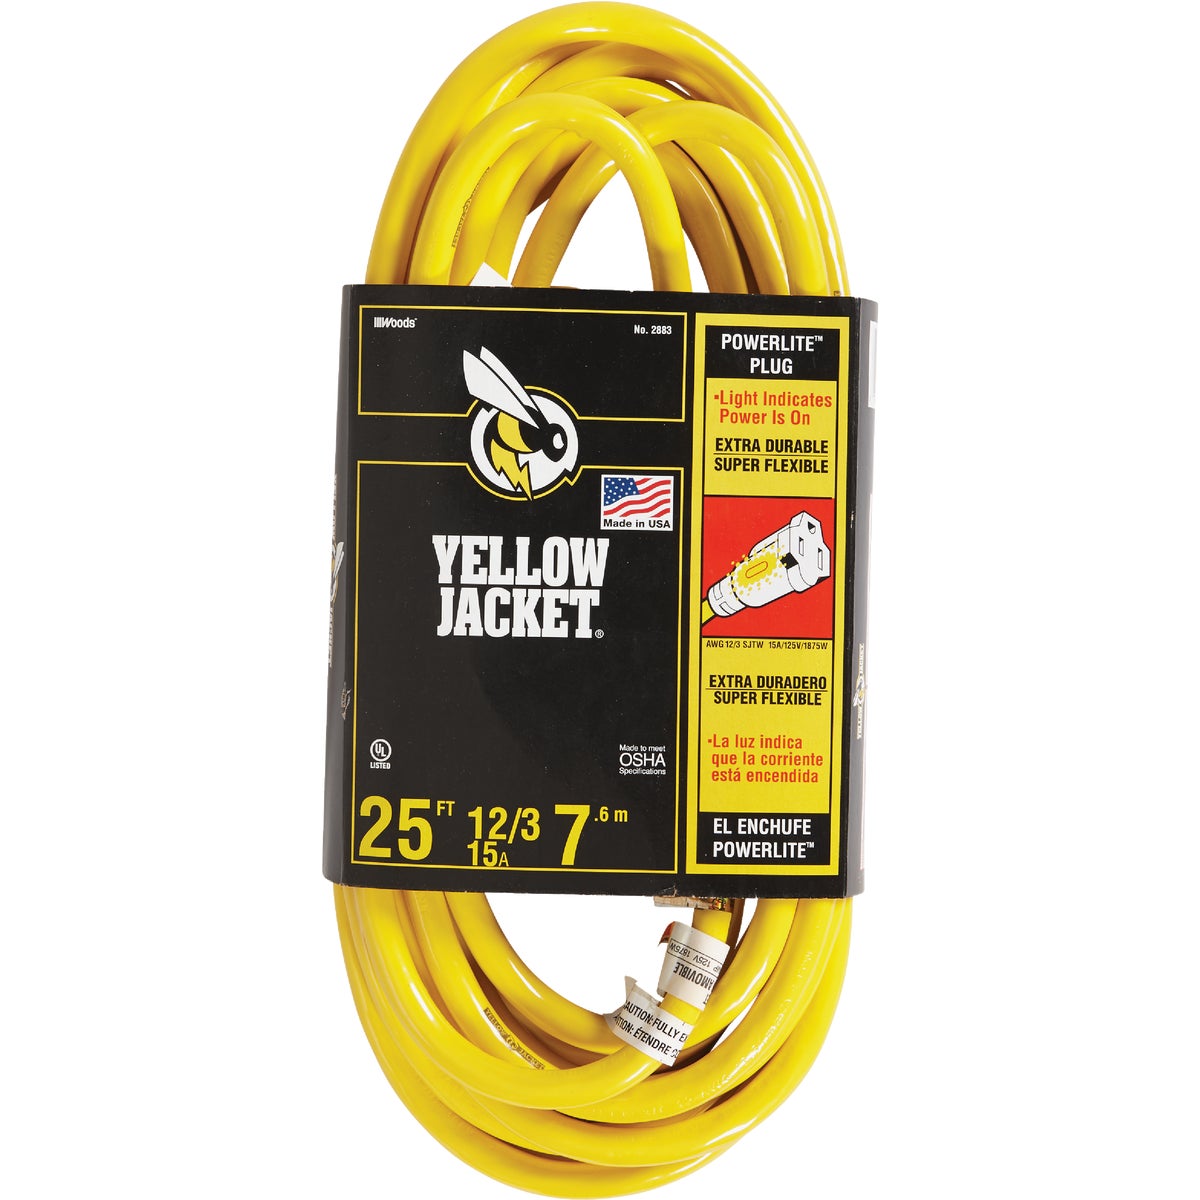 Item 551538, Durable extension cord featuring a lighted end to indicate that there is 